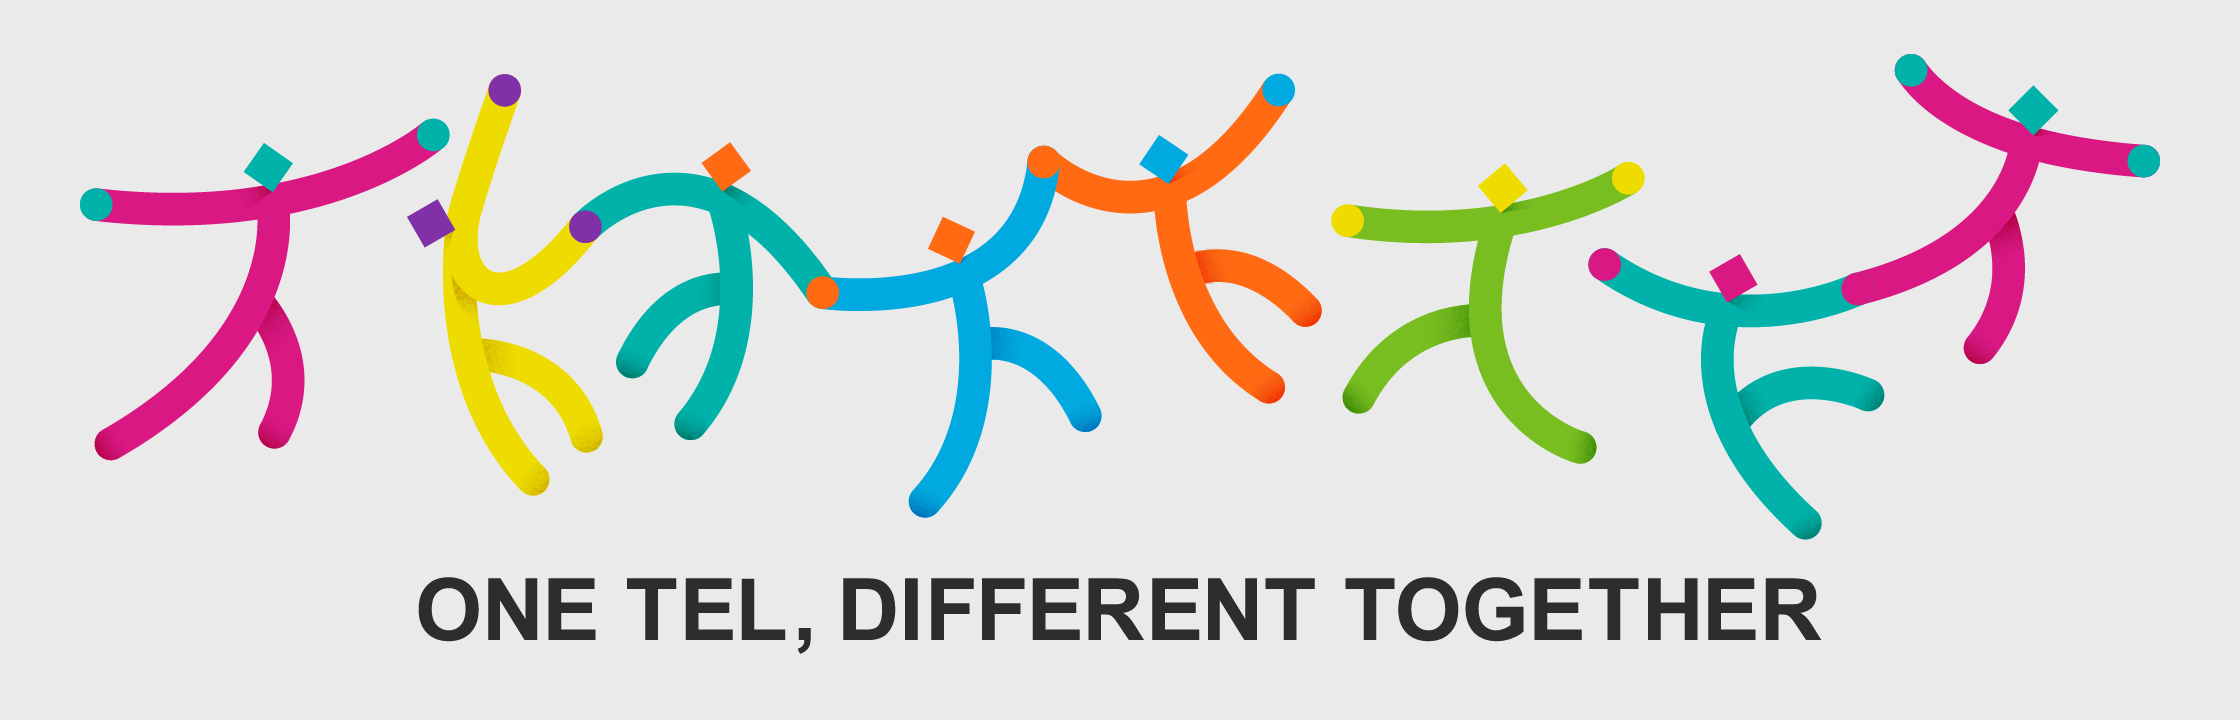 TEL的DE&I宣传语 "ONE TEL, DIFFERENT TOGETHER"的示意图。